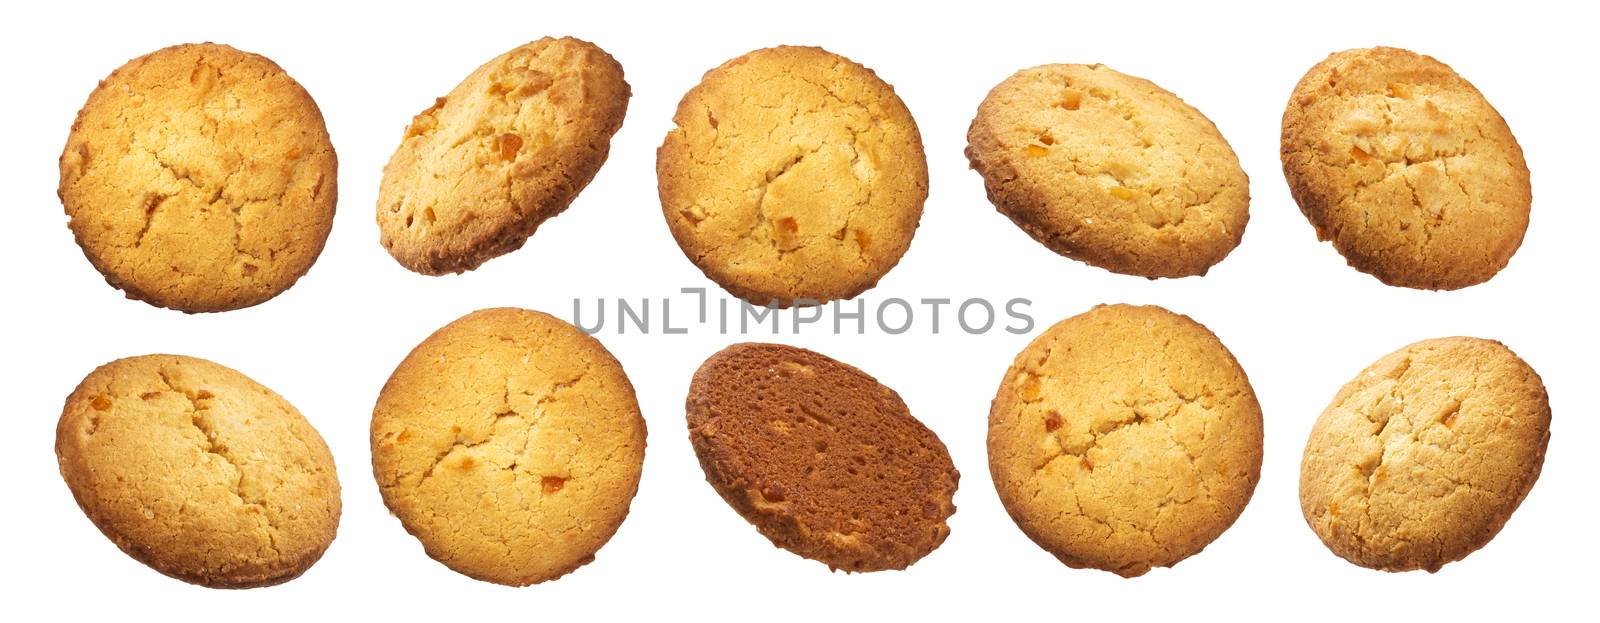 Oatmeal cookies collection isolated on white background by xamtiw